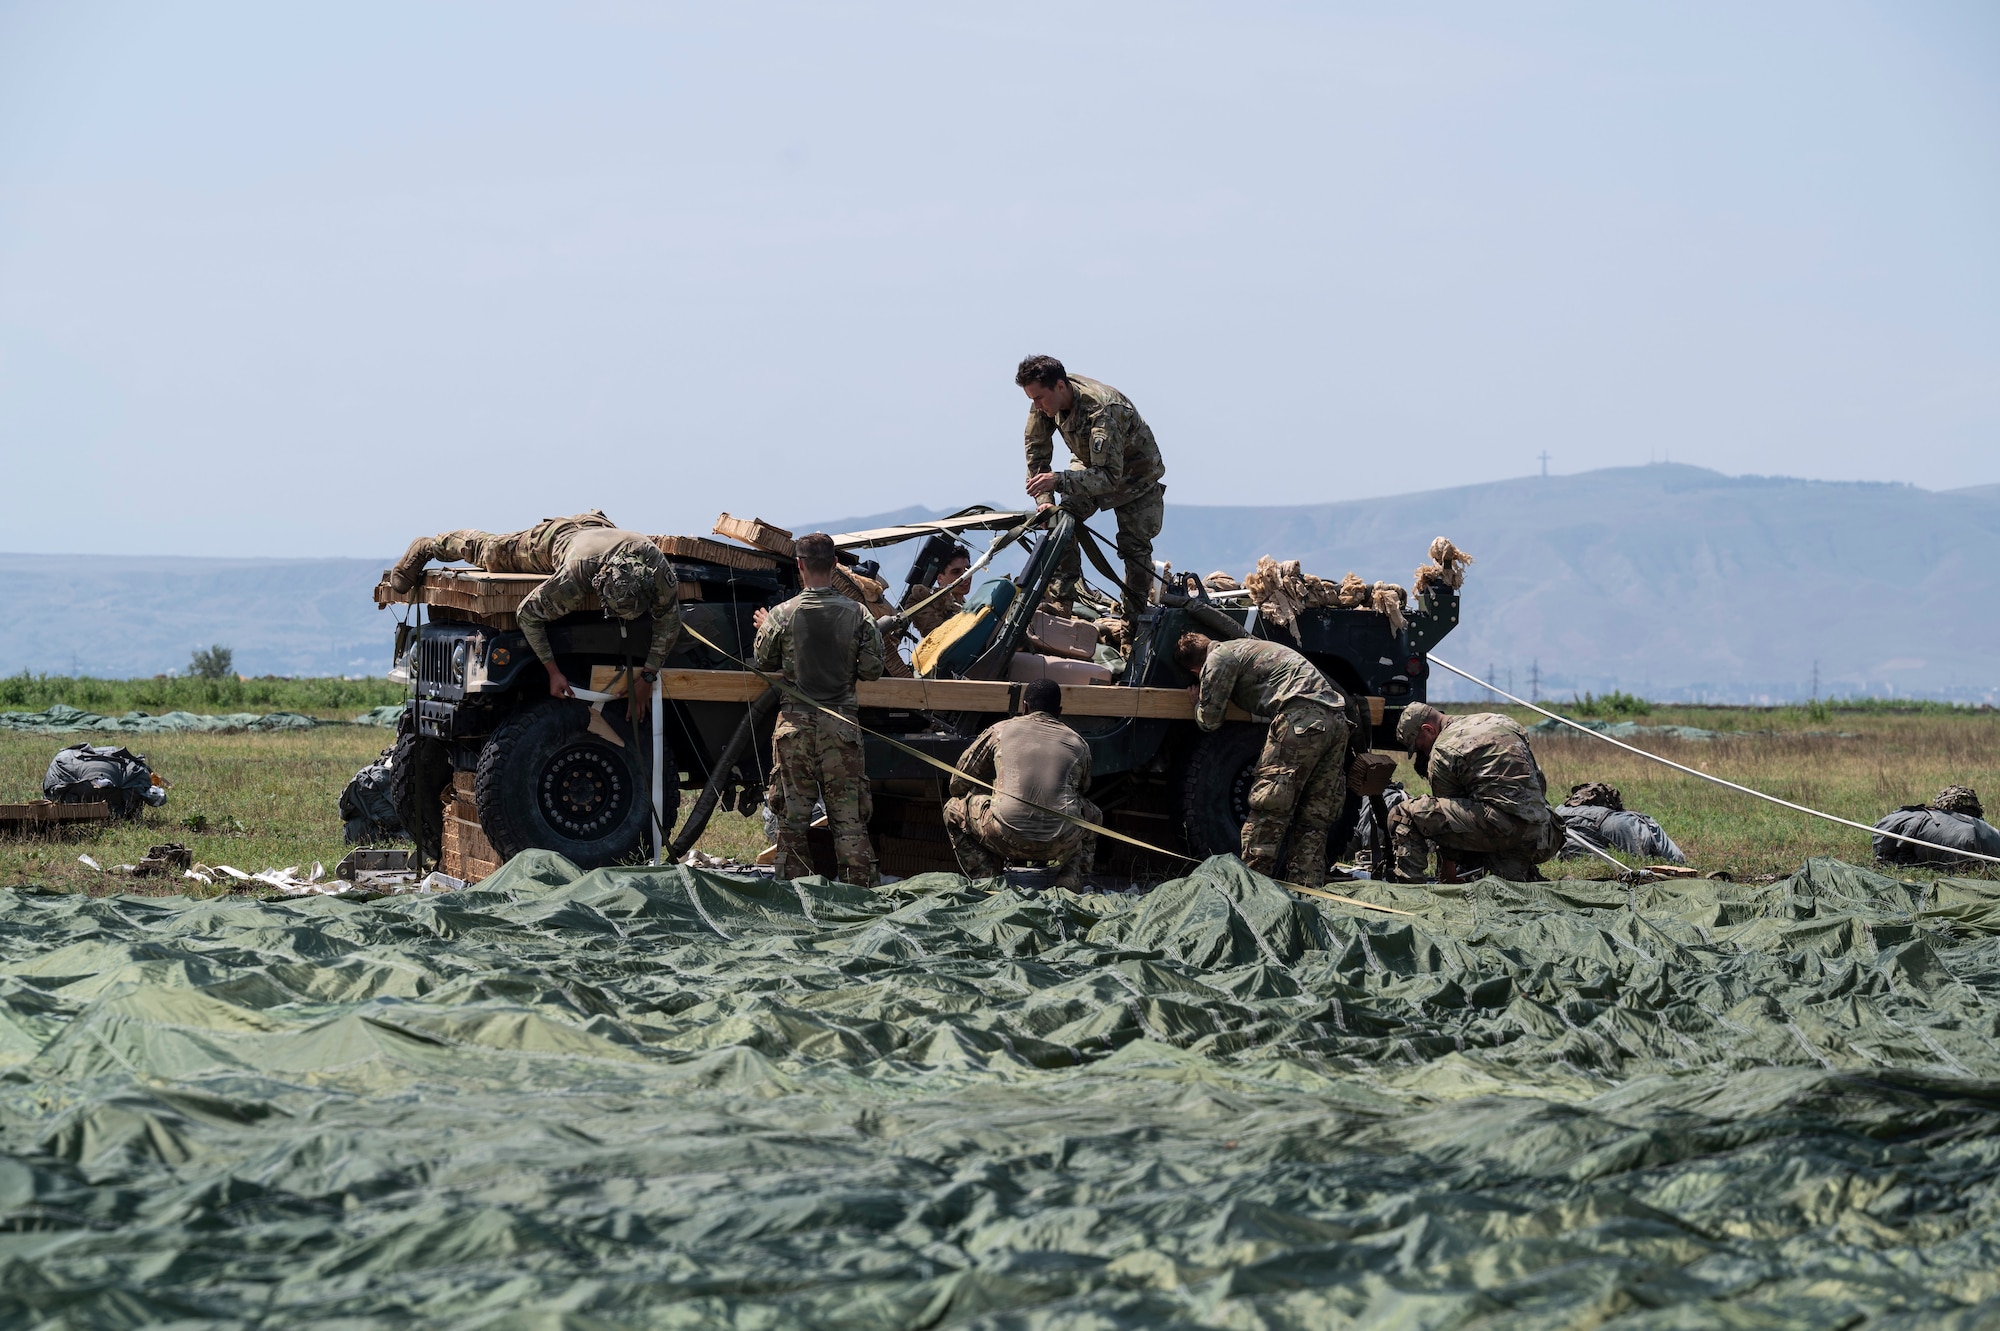 U.S. Army soldiers assigned to the 1st Squadron, 91st Cavalry Regiment, 173rd Infantry Brigade Combat Team (airborne) retrieve a piece of heavy cargo after an airdrop demonstration during exercise Agile Spirit 21